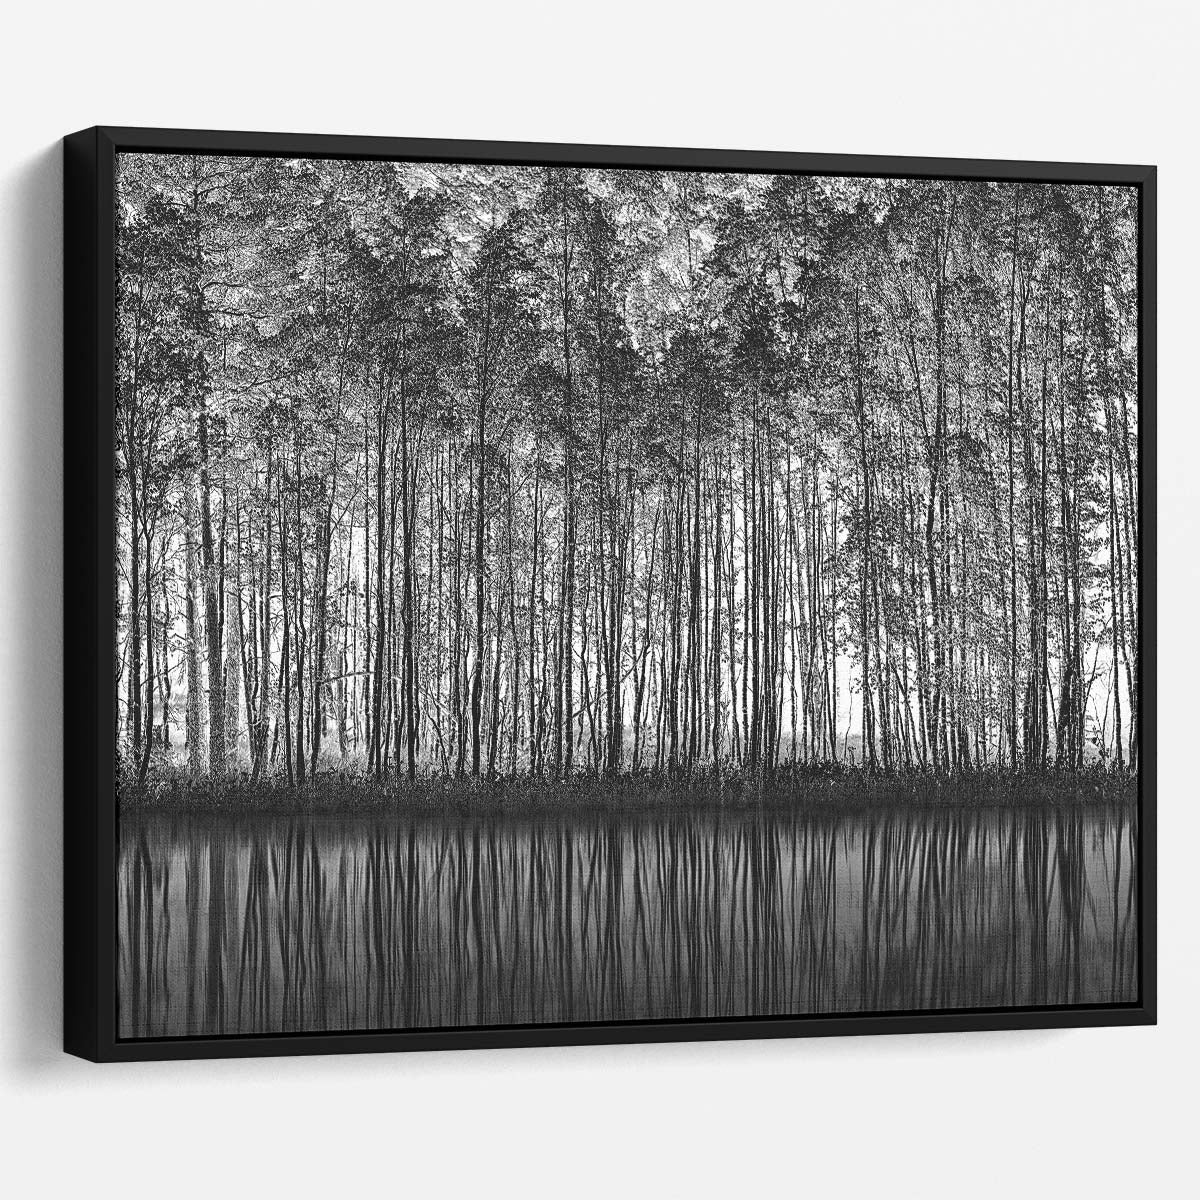 Serene Monochrome Forest Reflection Landscape Wall Art by Luxuriance Designs. Made in USA.